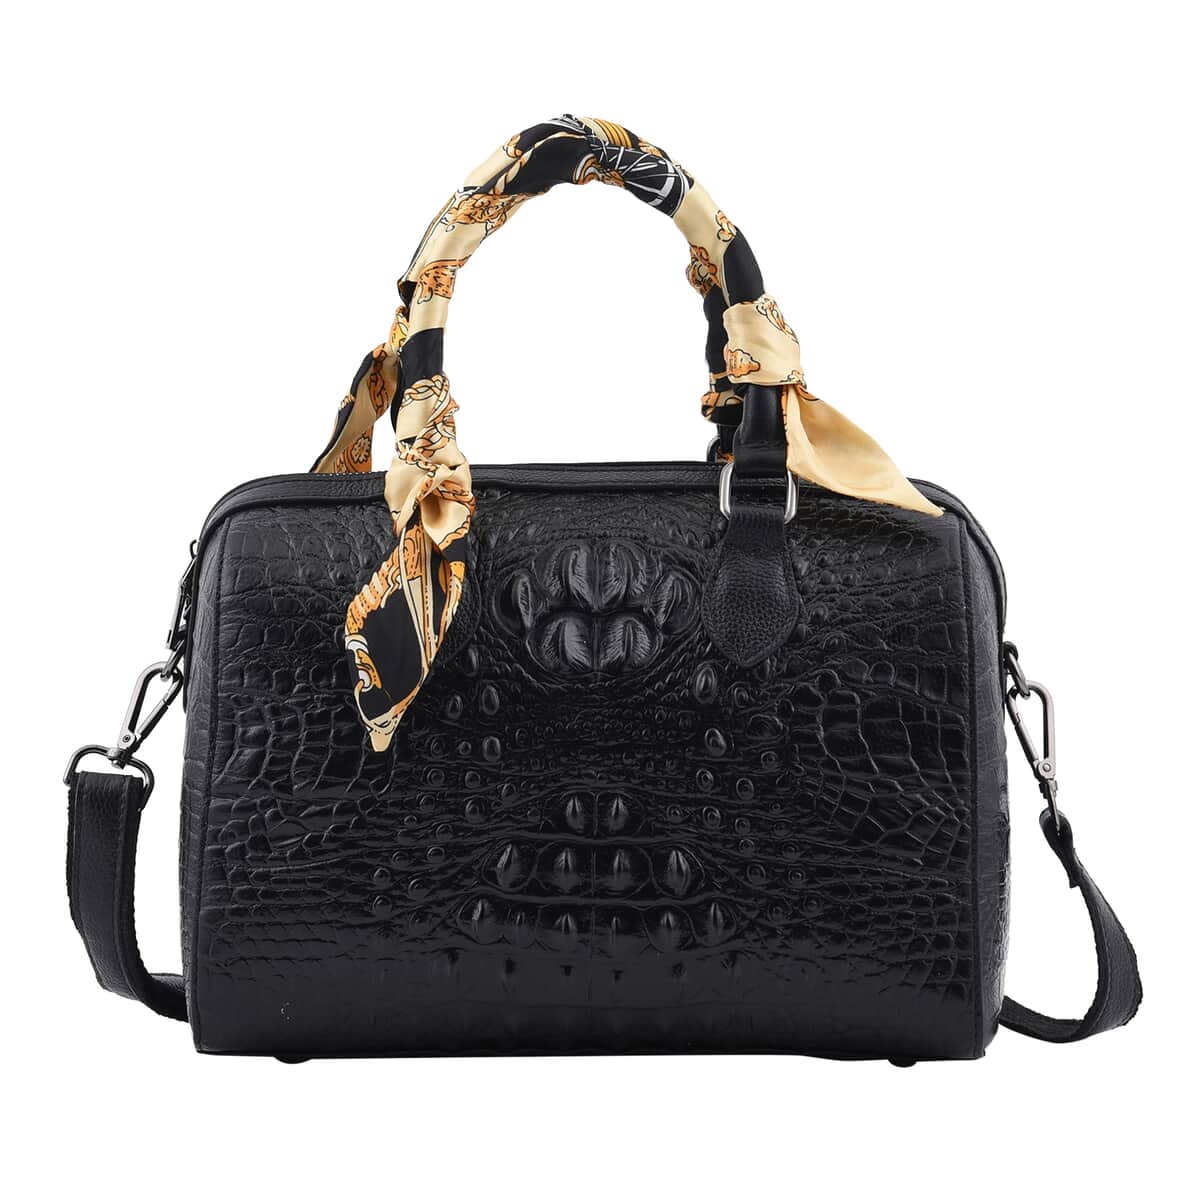 Black Crocodile Embossed Pattern Genuine Leather Crossbody Bag (11"x5"x9") with Hand Scarf Strap and Shoulder Strap image number 0